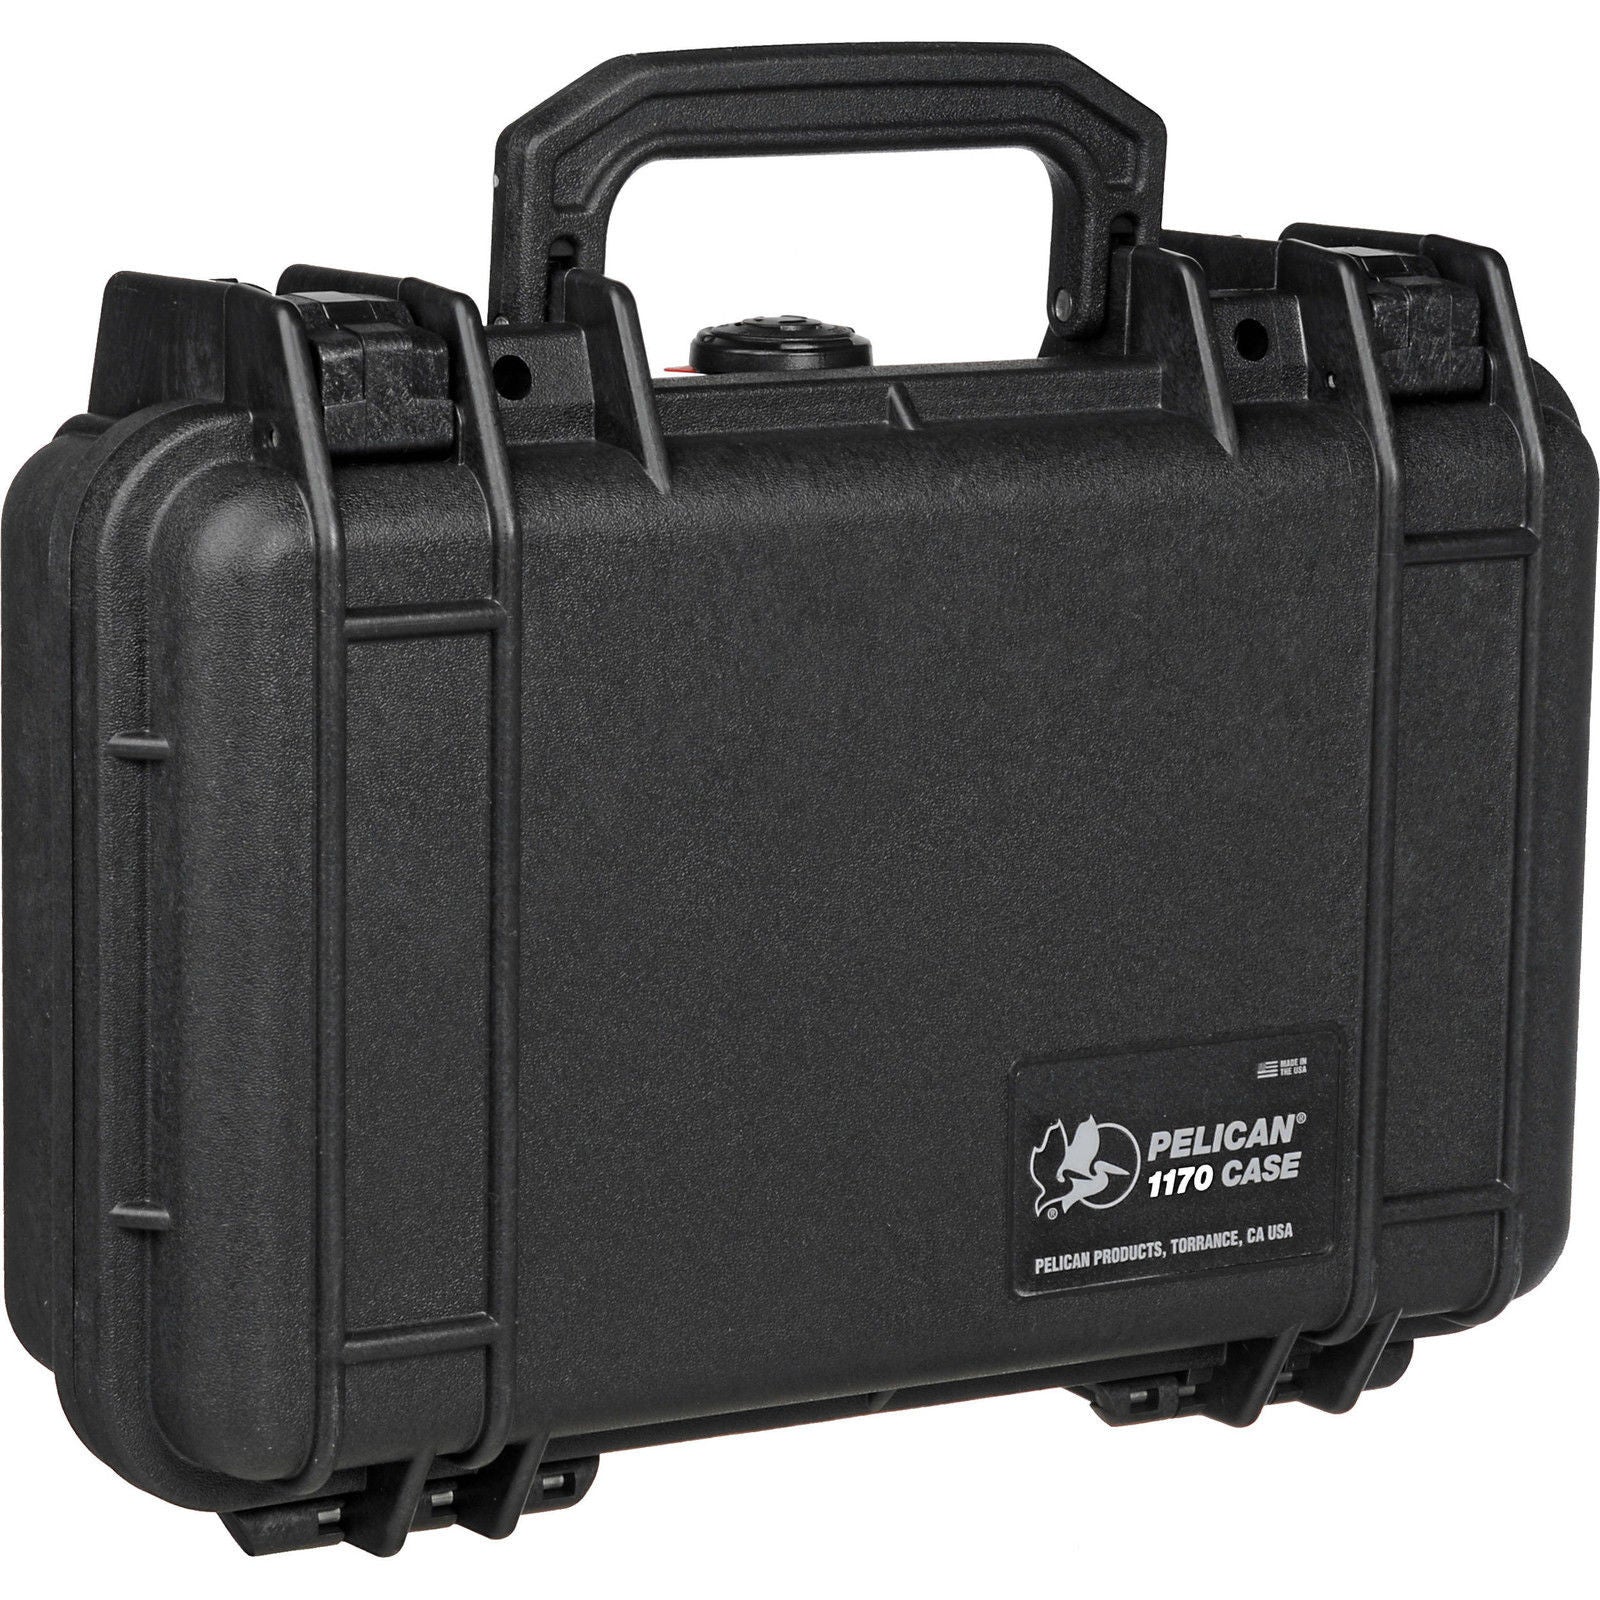 1170 Protector Case  Peli Official Store